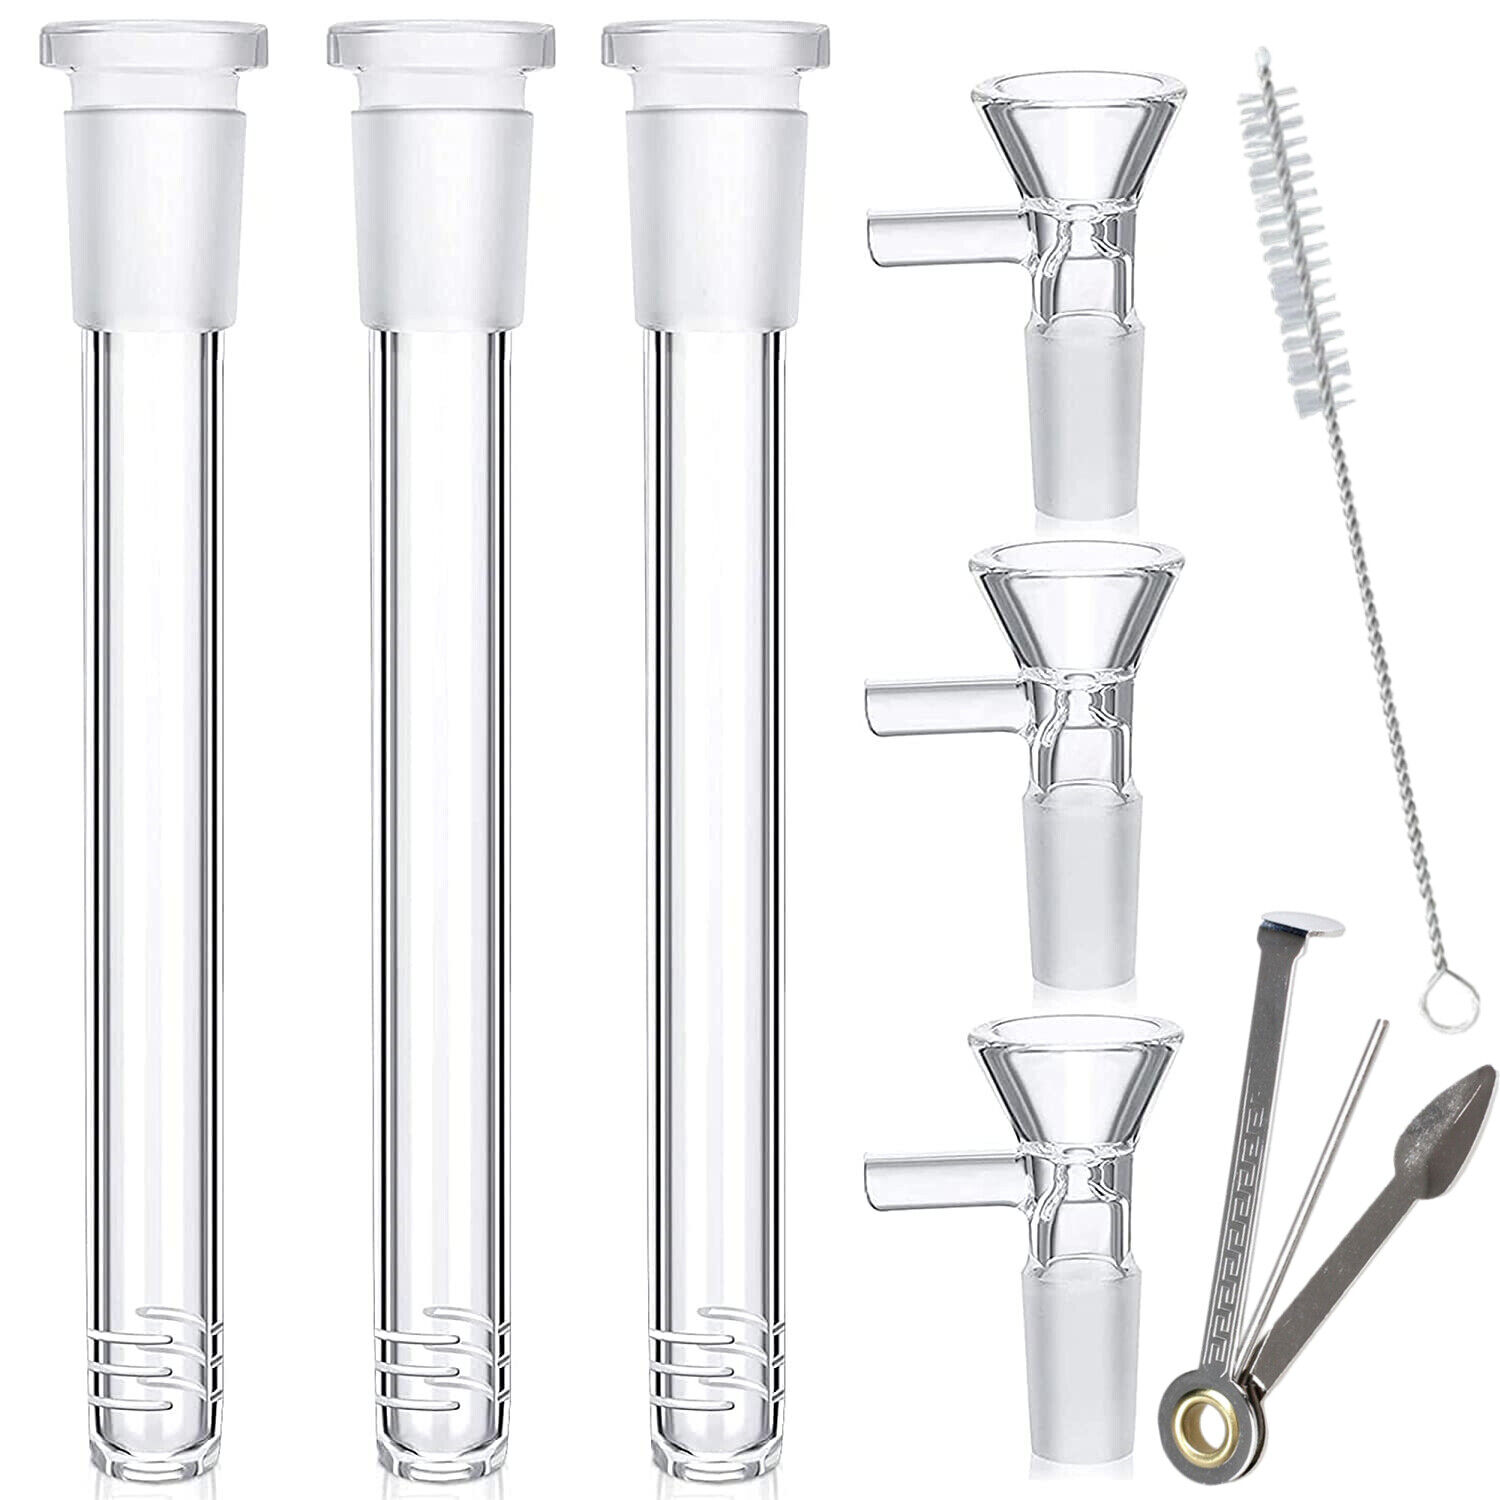 8Pcs/Set Hookah Water Pipe Glass Bong Down Stem Downstem 14mm male bowl piece. Available Now for 13.17